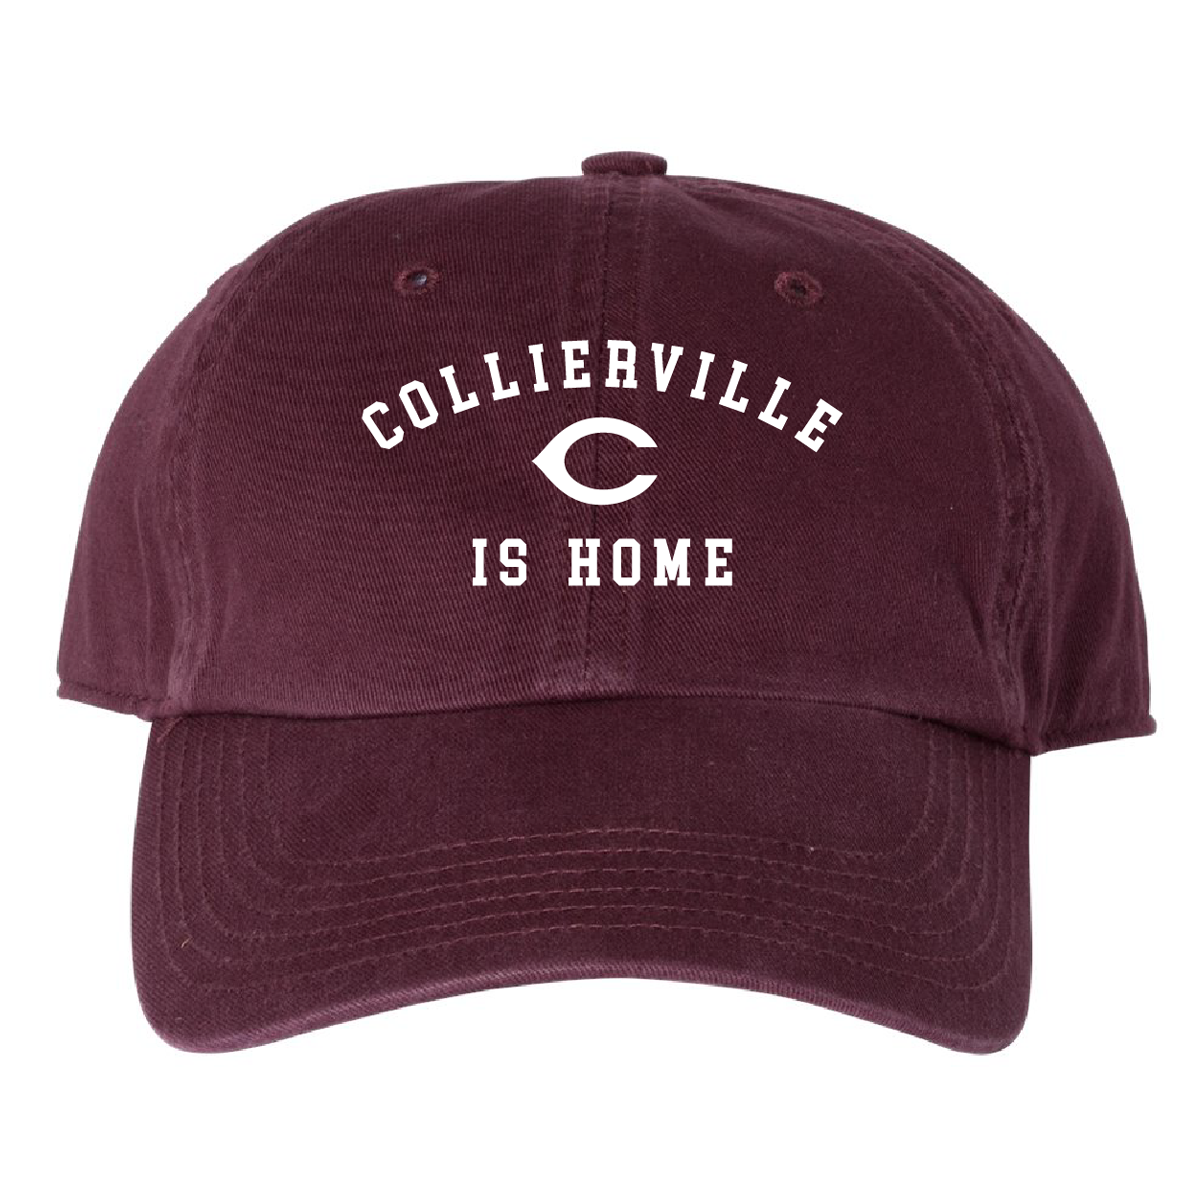 Collierville is Home